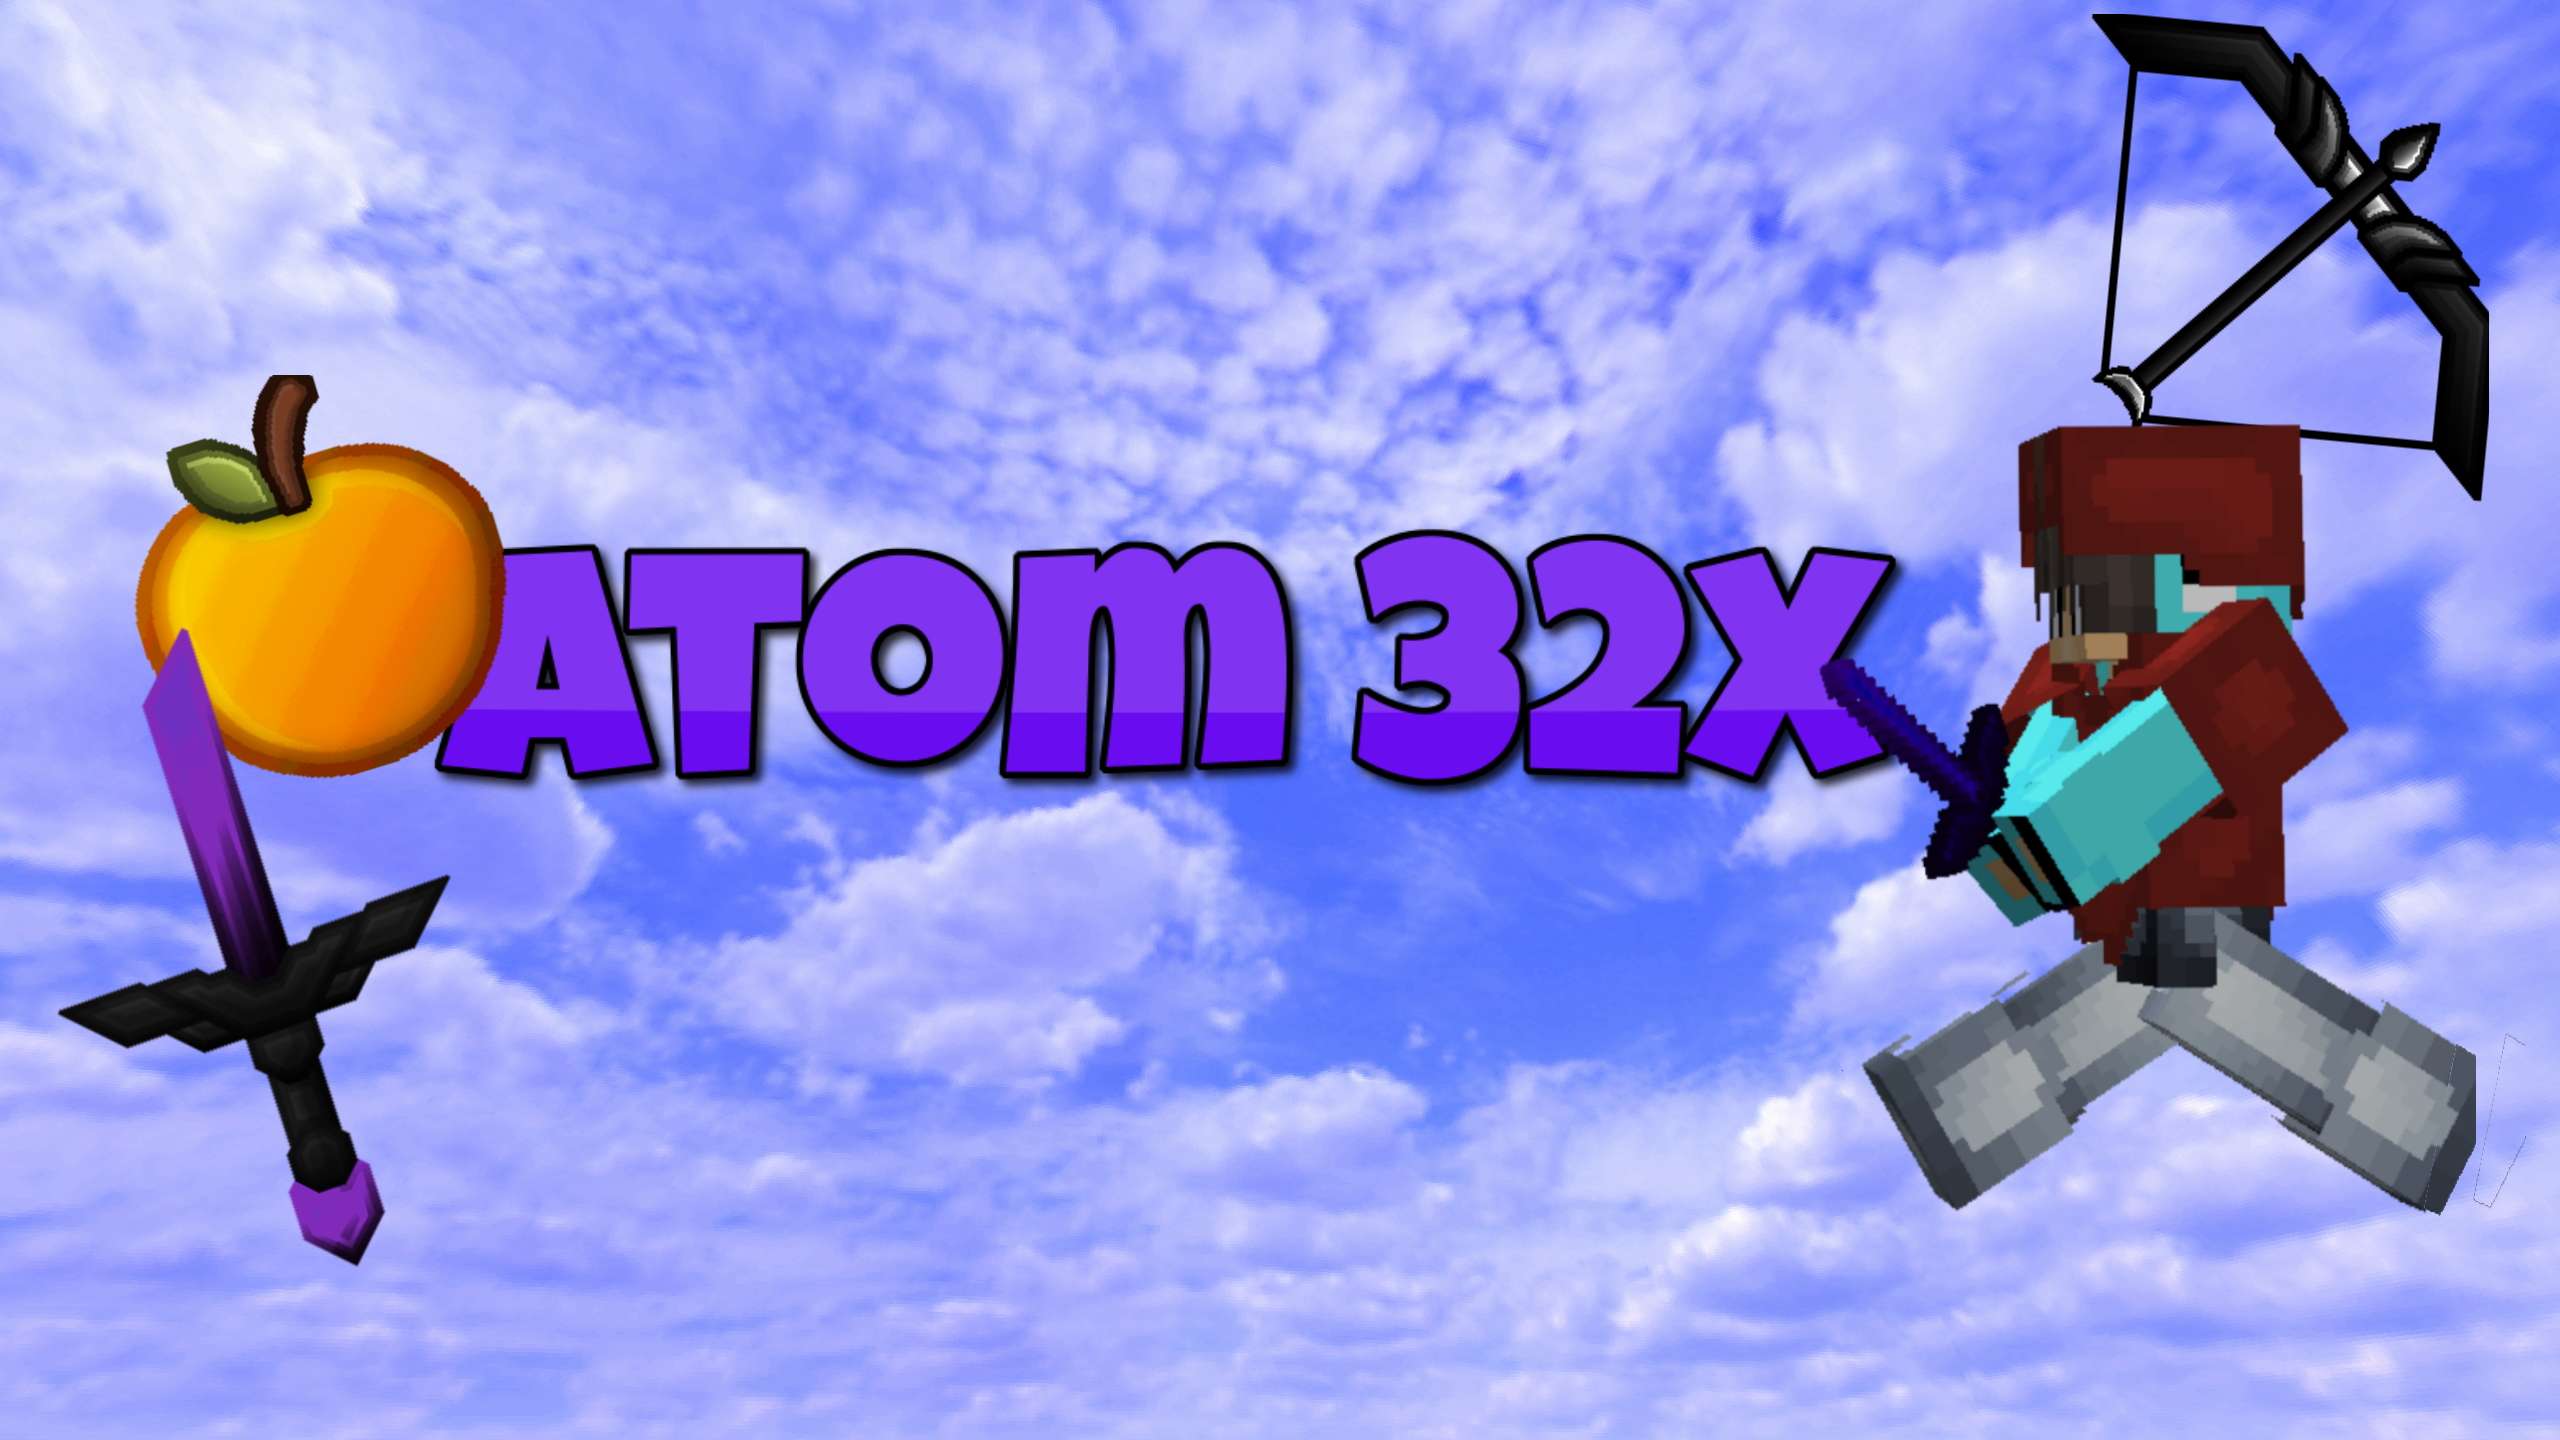 Atom 32x by ander on PvPRP